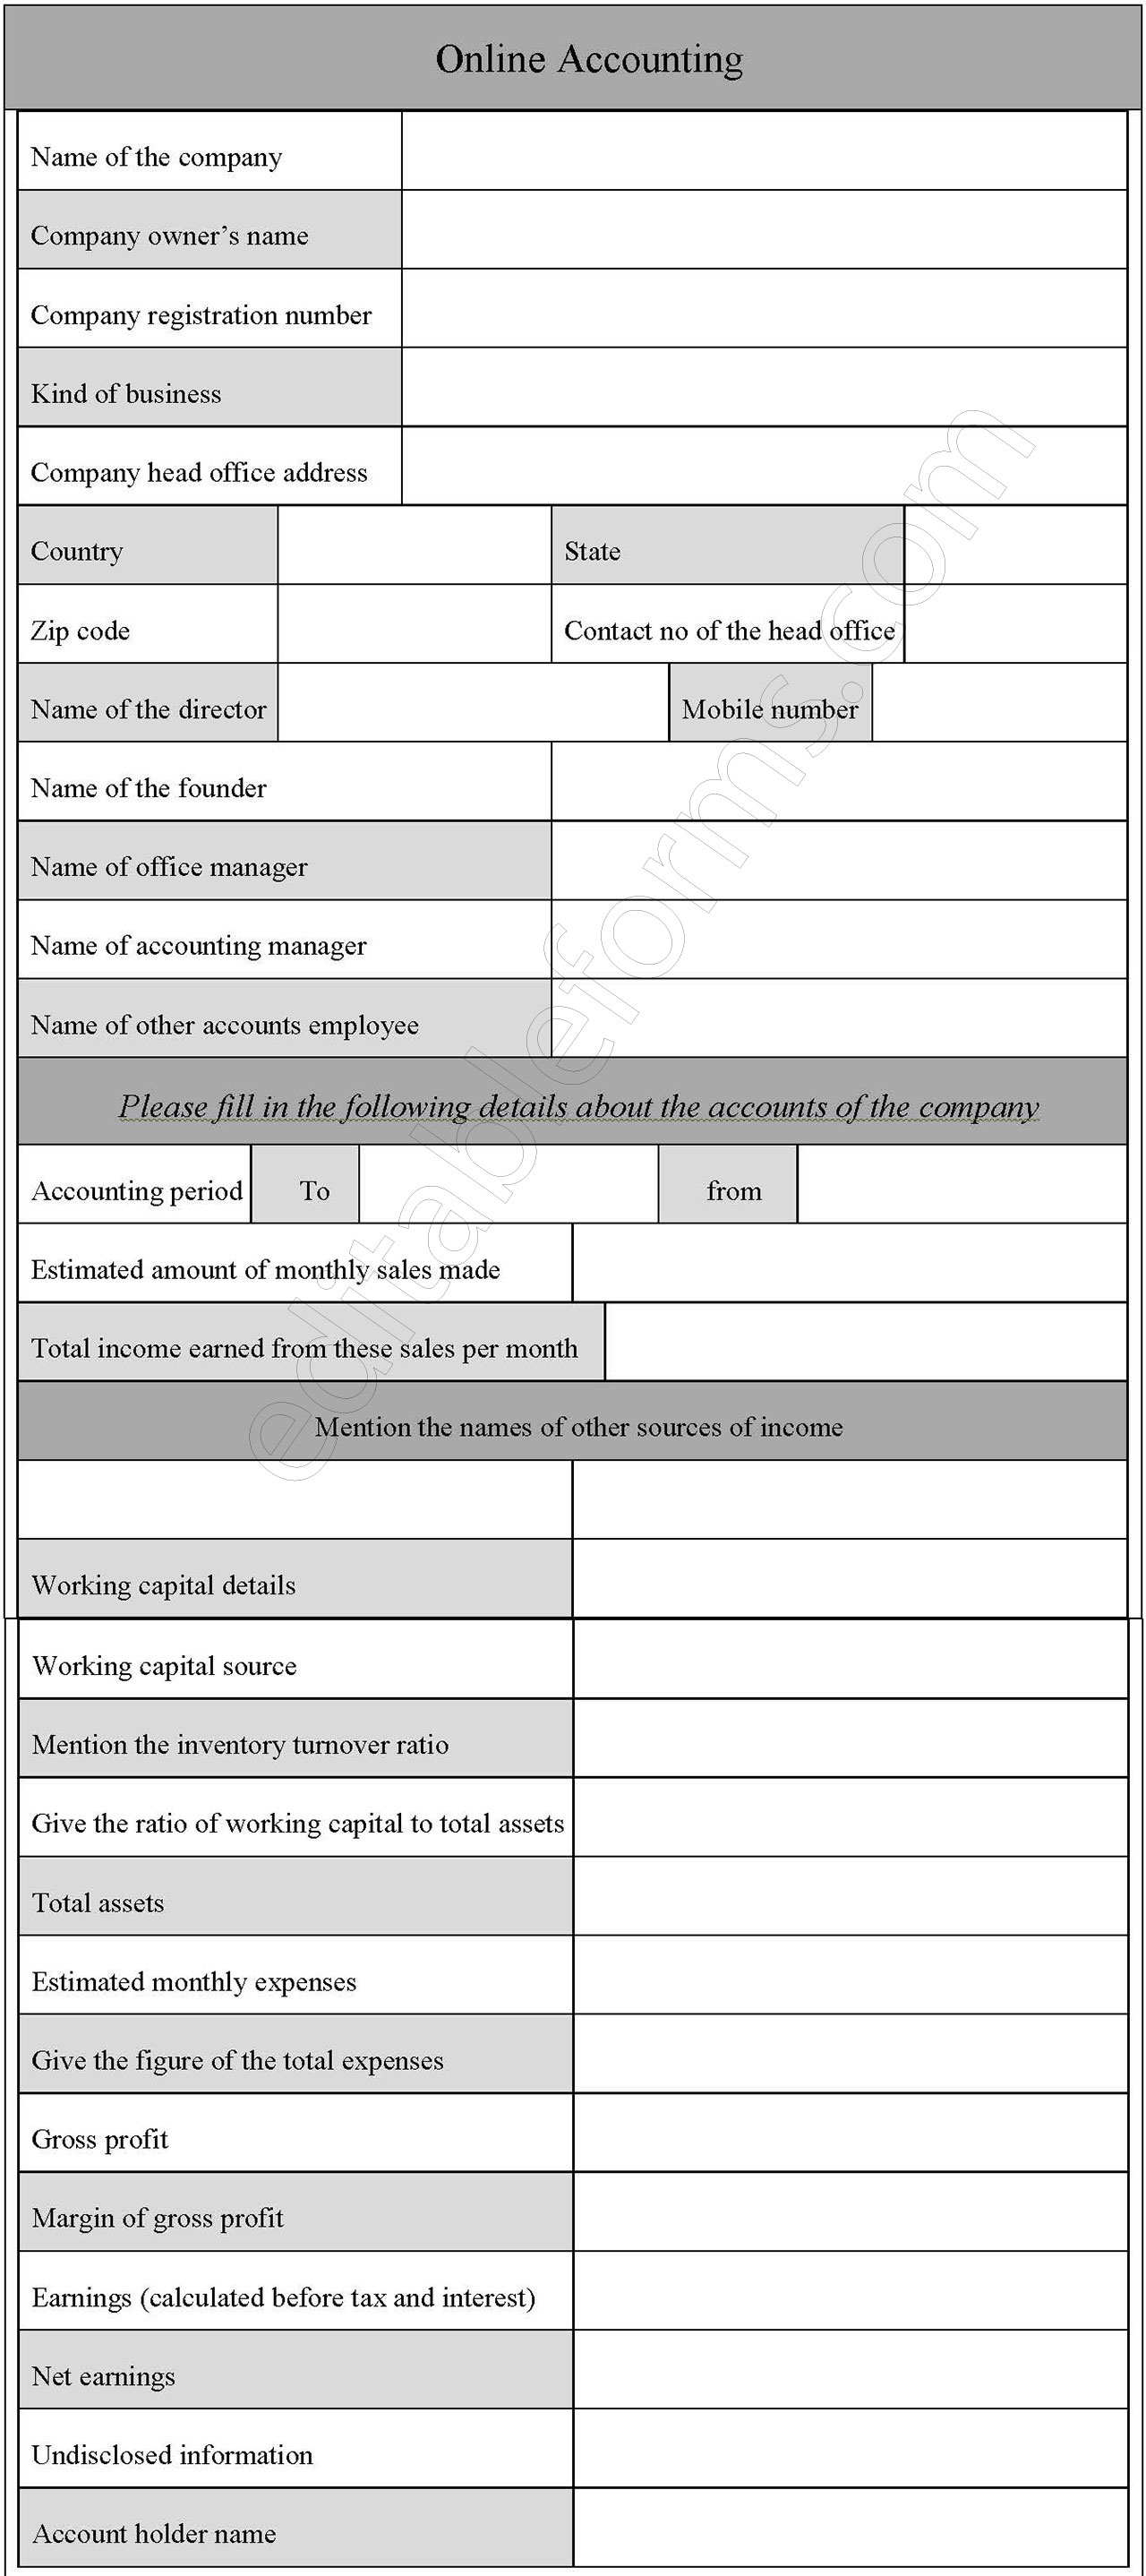 Online Accounting Form